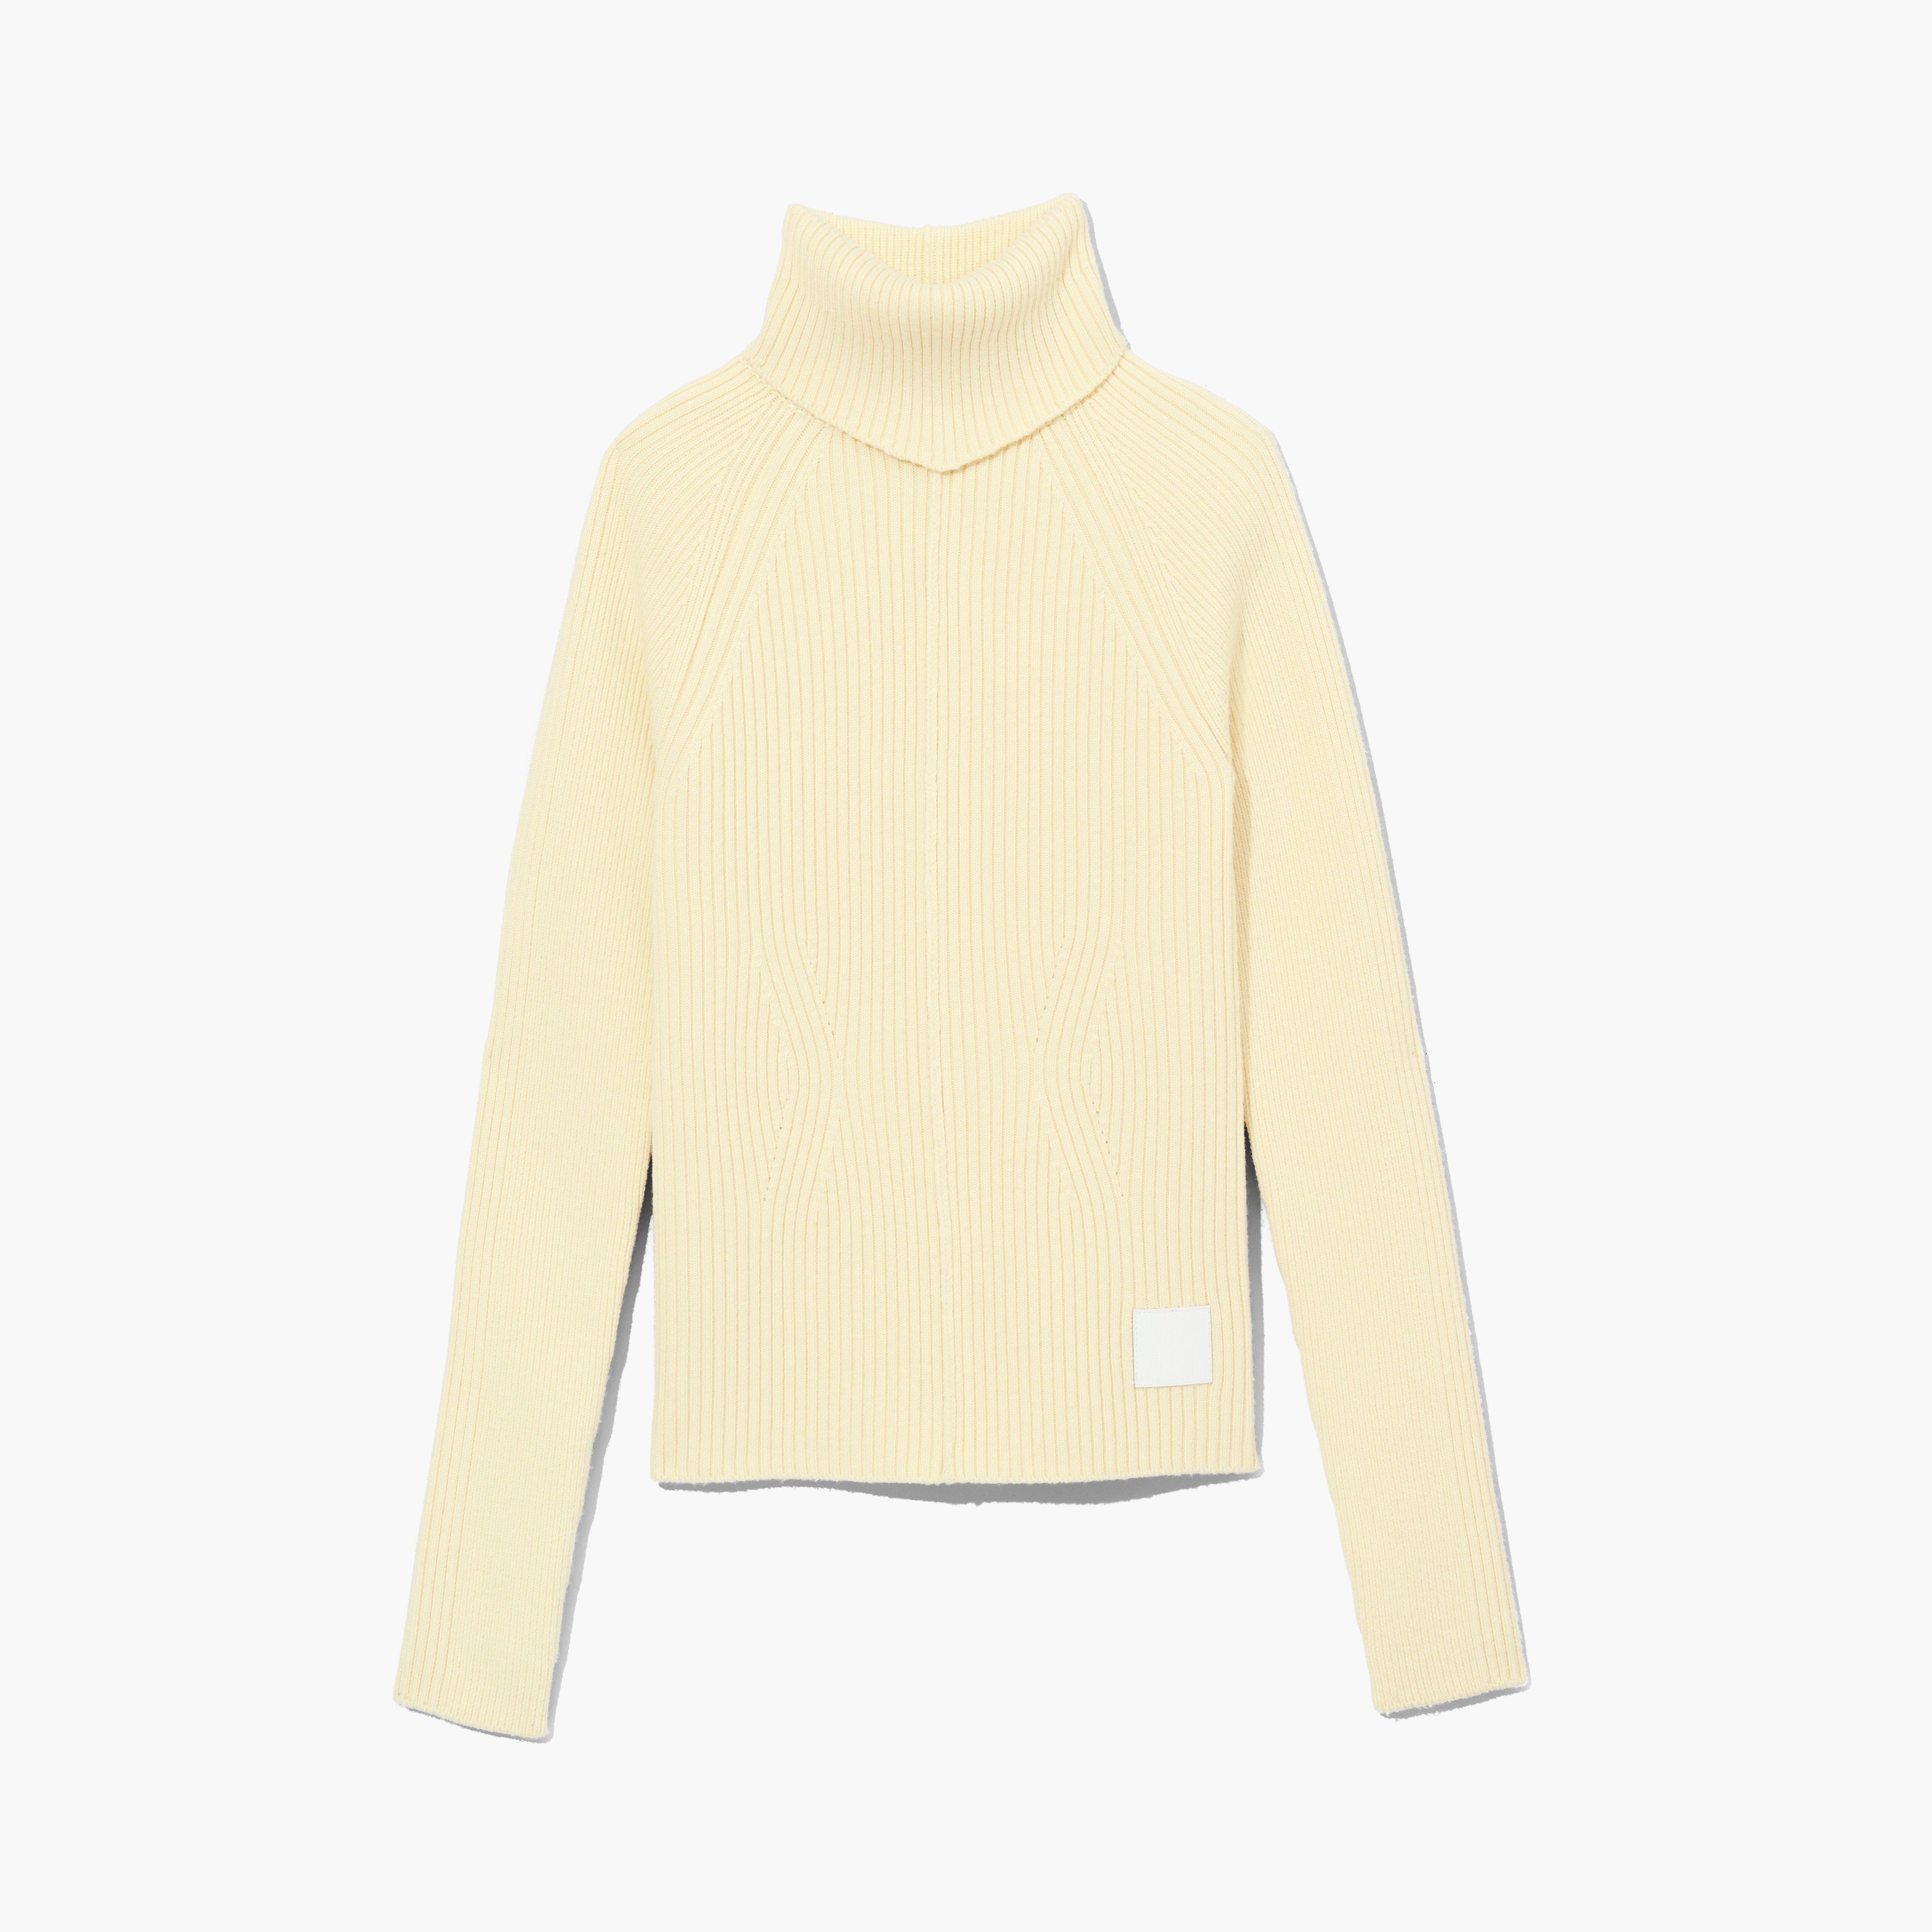 Marc by Marc jacobs The Ribbed Turtleneck,TENDER YELLOW